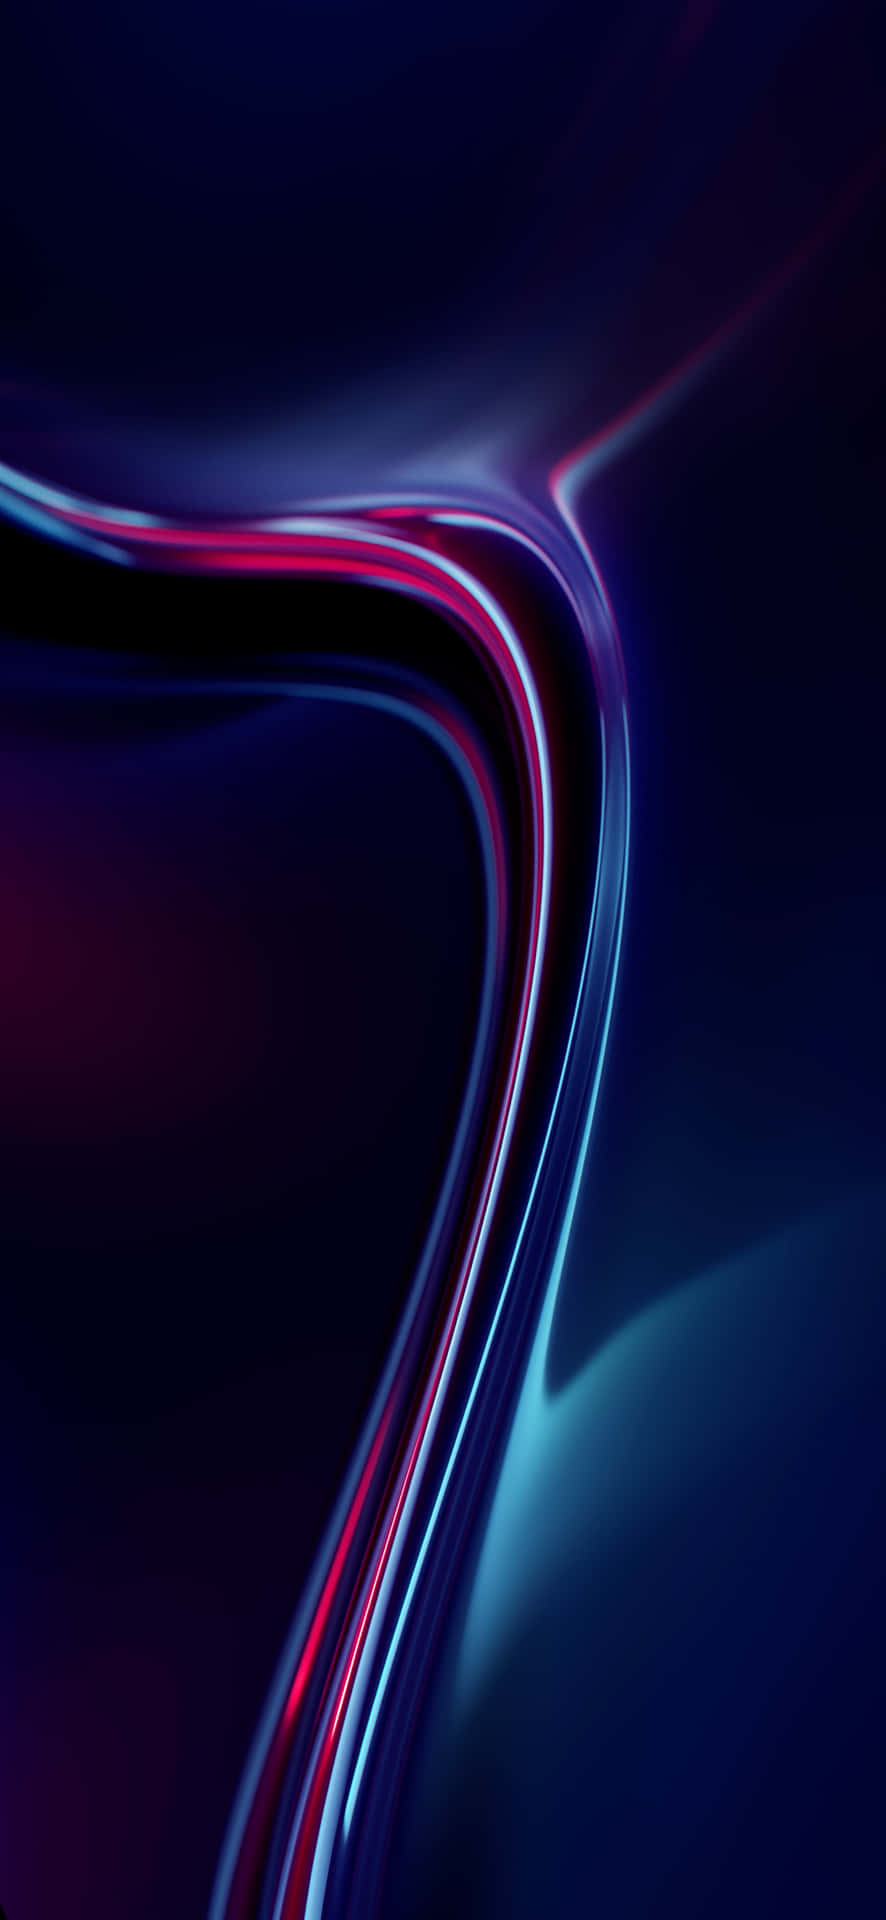 1080x2340 4k Neon Abstract Wave Wallpaper